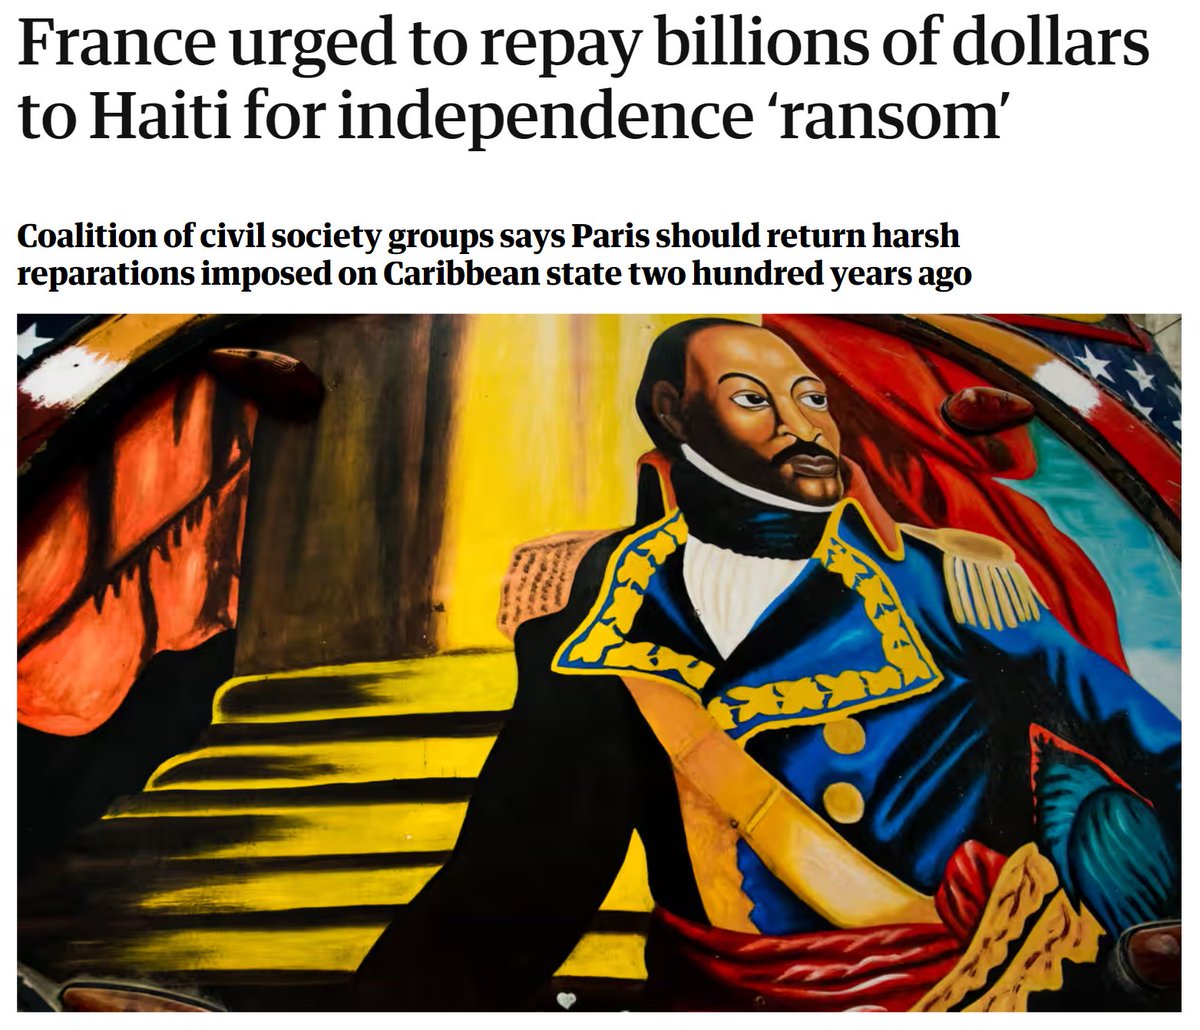 🇭🇹 ⛓️ When Haitians defeated the French military and ended slavery on the island, France and its allies forced Haiti to pay reverse-reparations for the abolition of slavery. Today, a UN group is urging France to repay its ill-gotten gains. Details: theguardian.com/world/2024/apr…